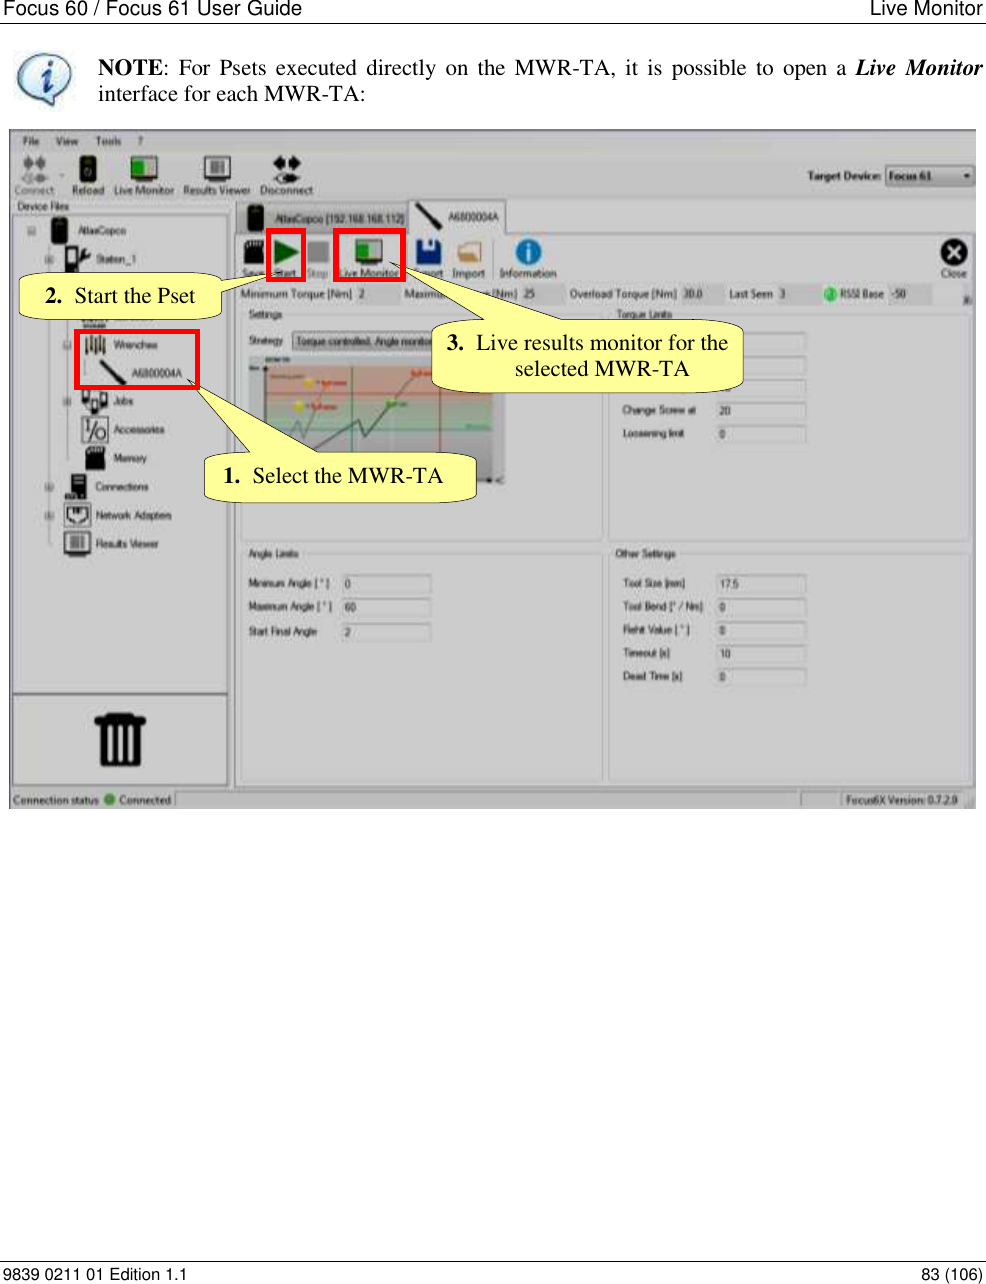 Focus 60 / Focus 61 User Guide  Live Monitor 9839 0211 01 Edition 1.1    83 (106)  NOTE: For Psets executed directly on the MWR-TA,  it is  possible to open a  Live Monitor interface for each MWR-TA:            2. Start the Pset 3. Live results monitor for the selected MWR-TA 1. Select the MWR-TA 